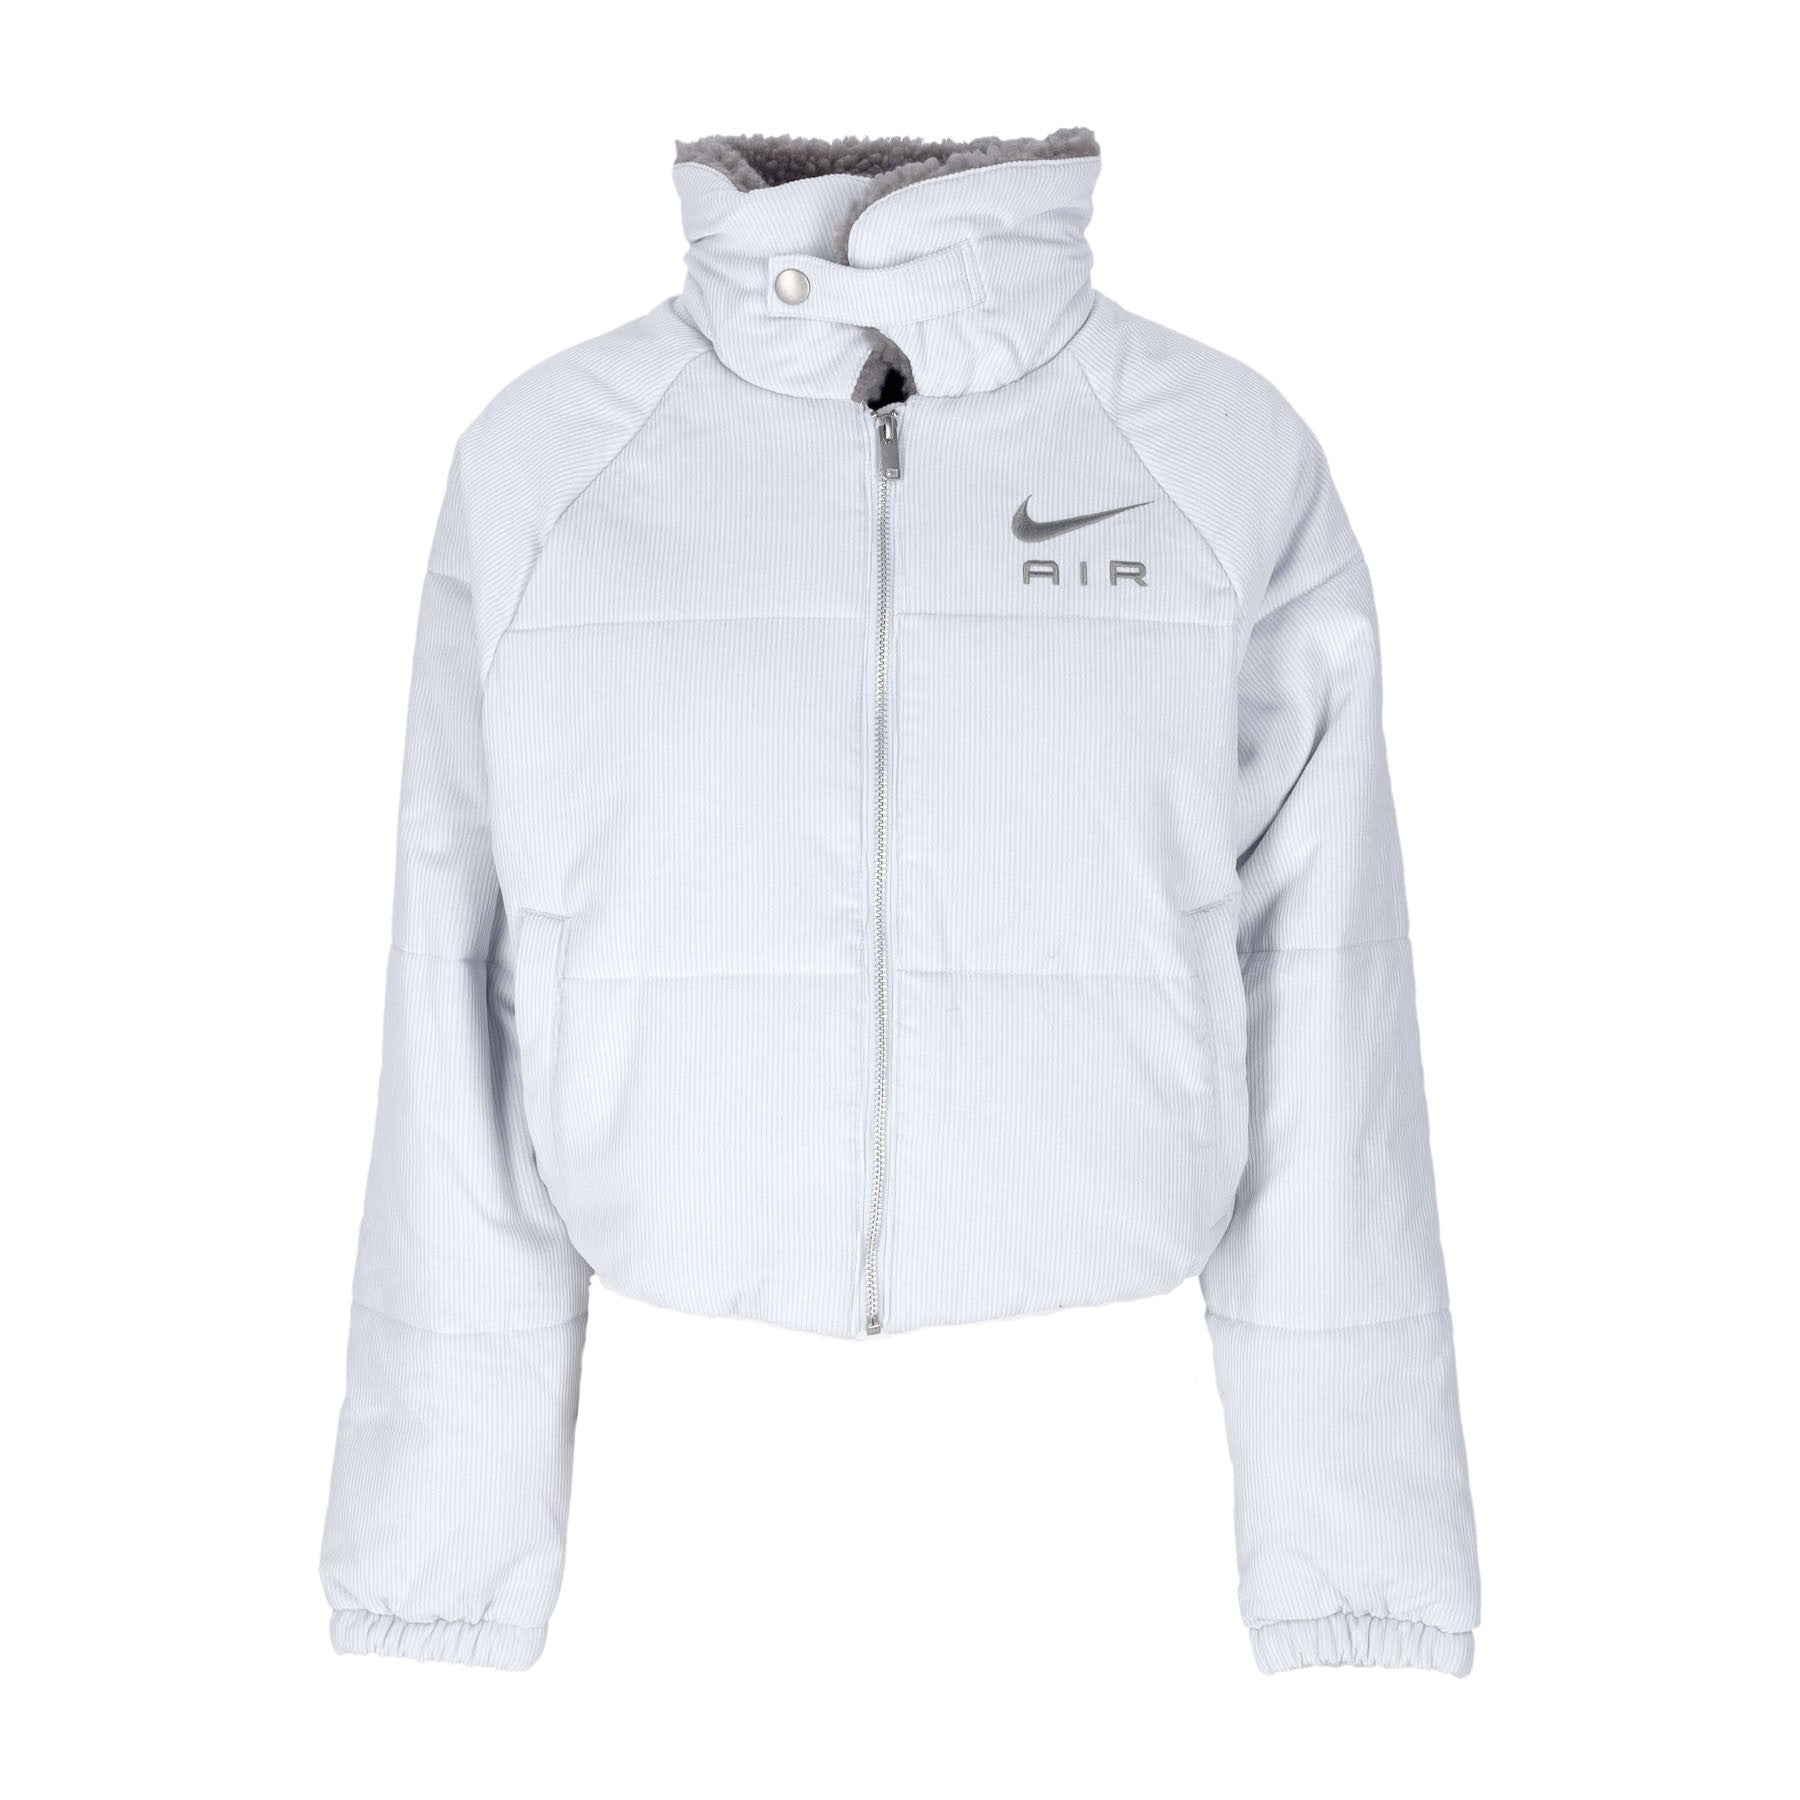 Nike, Giubbotto Corto Donna Sportswear Air Therma-fit Corduroy Winter Jacket, Pure Platinum/flat Pewter/flat Pewter